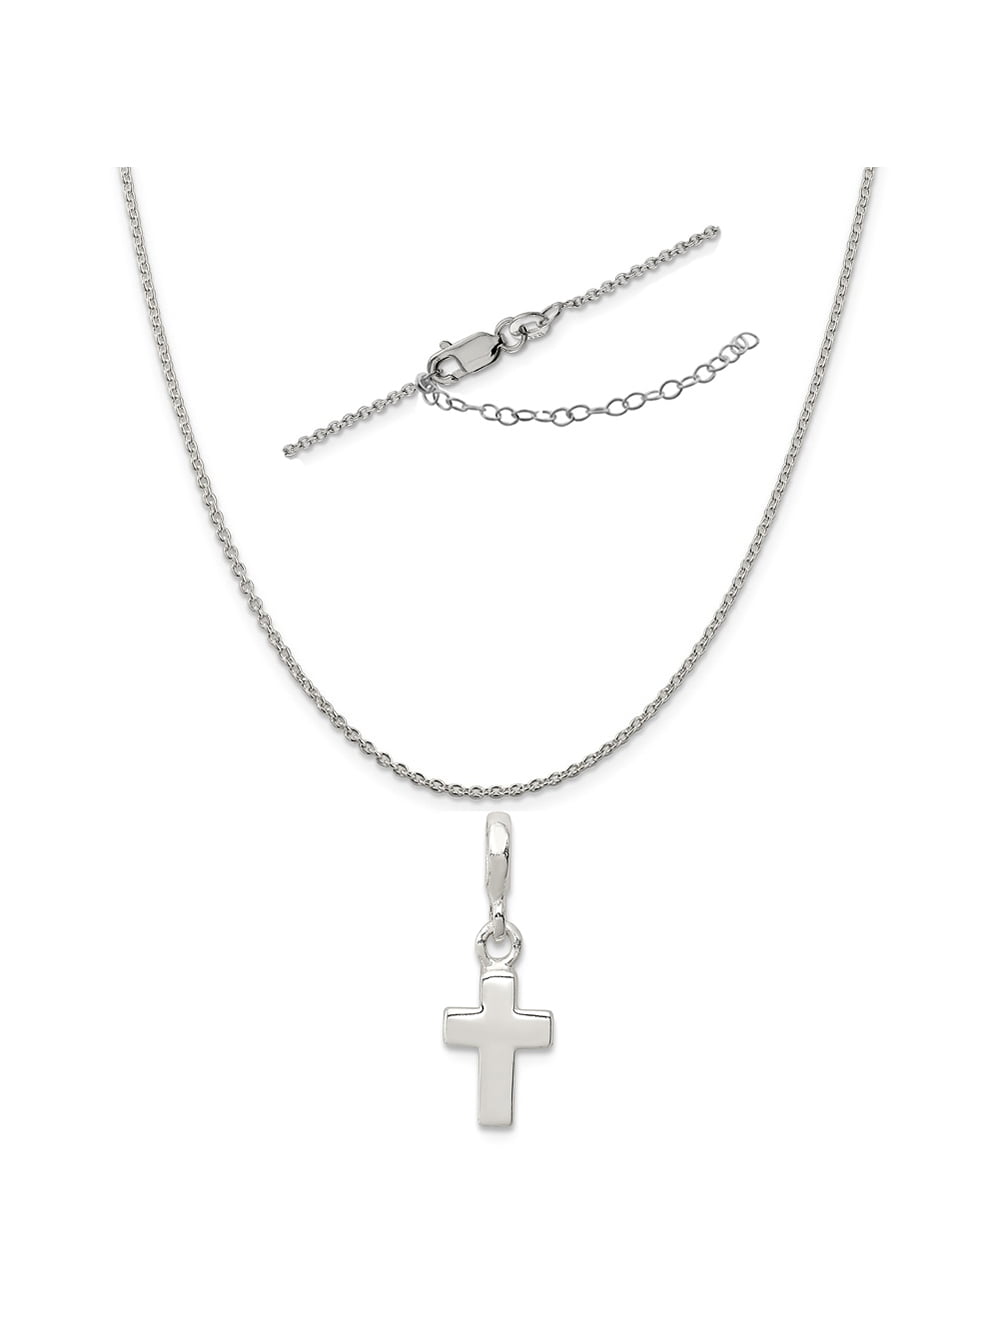 Sterling Silver Maltese Cross Necklace with Notches Women Flawless Polished Finish 1 inch 1.2mm Box_Chain